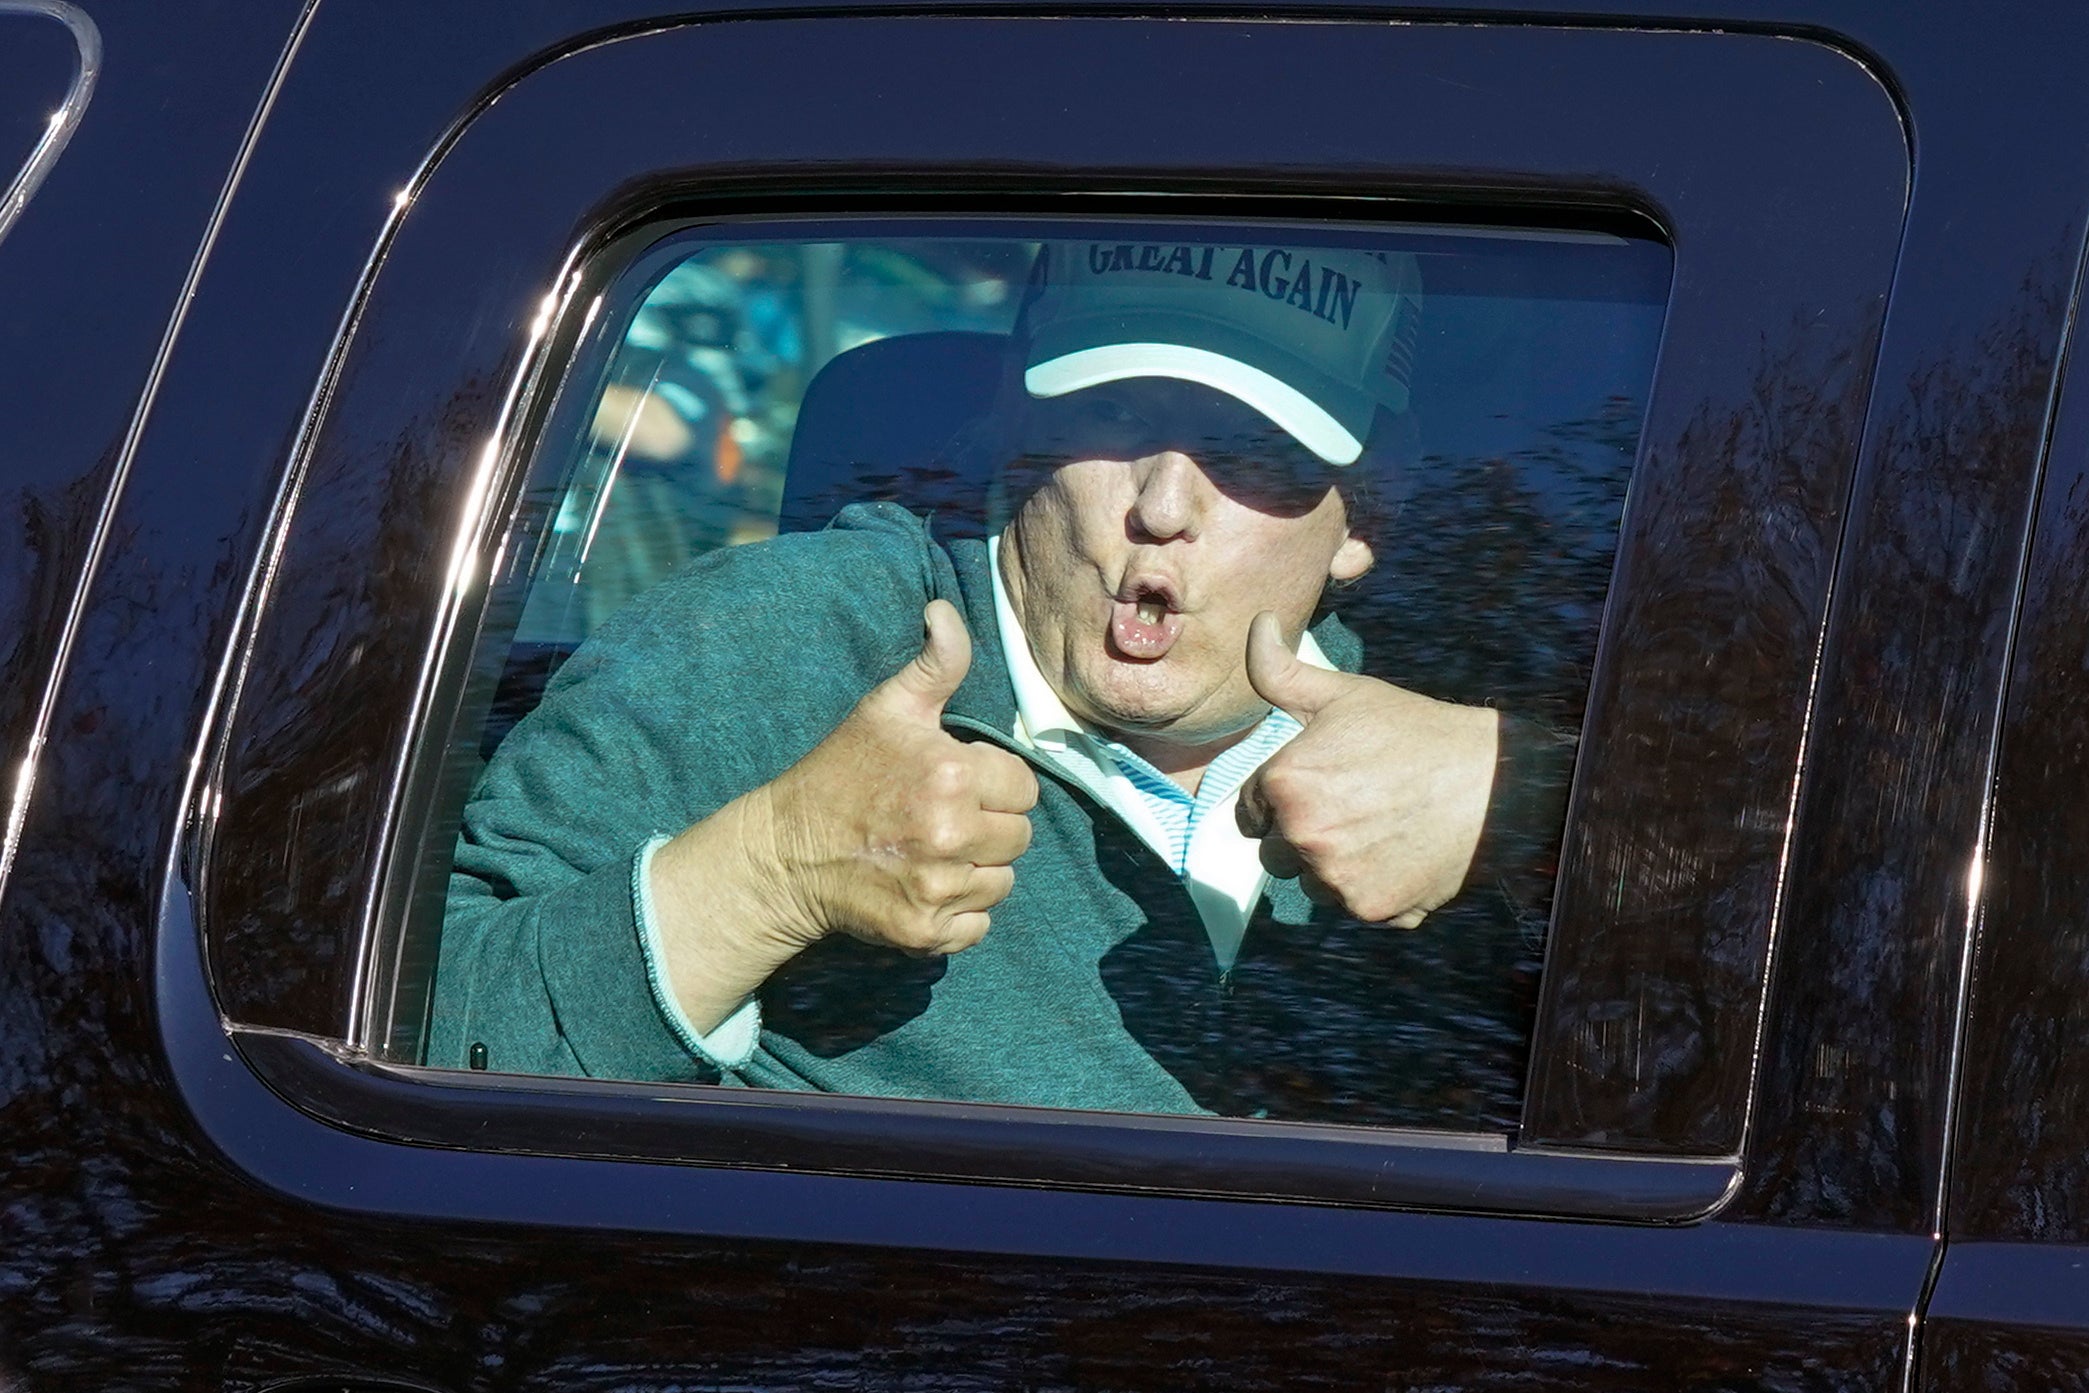 Trump gives two thumbs up to supporters as he departs after playing golf at the Trump National Golf Club the day after Biden is announced as the winner of US election